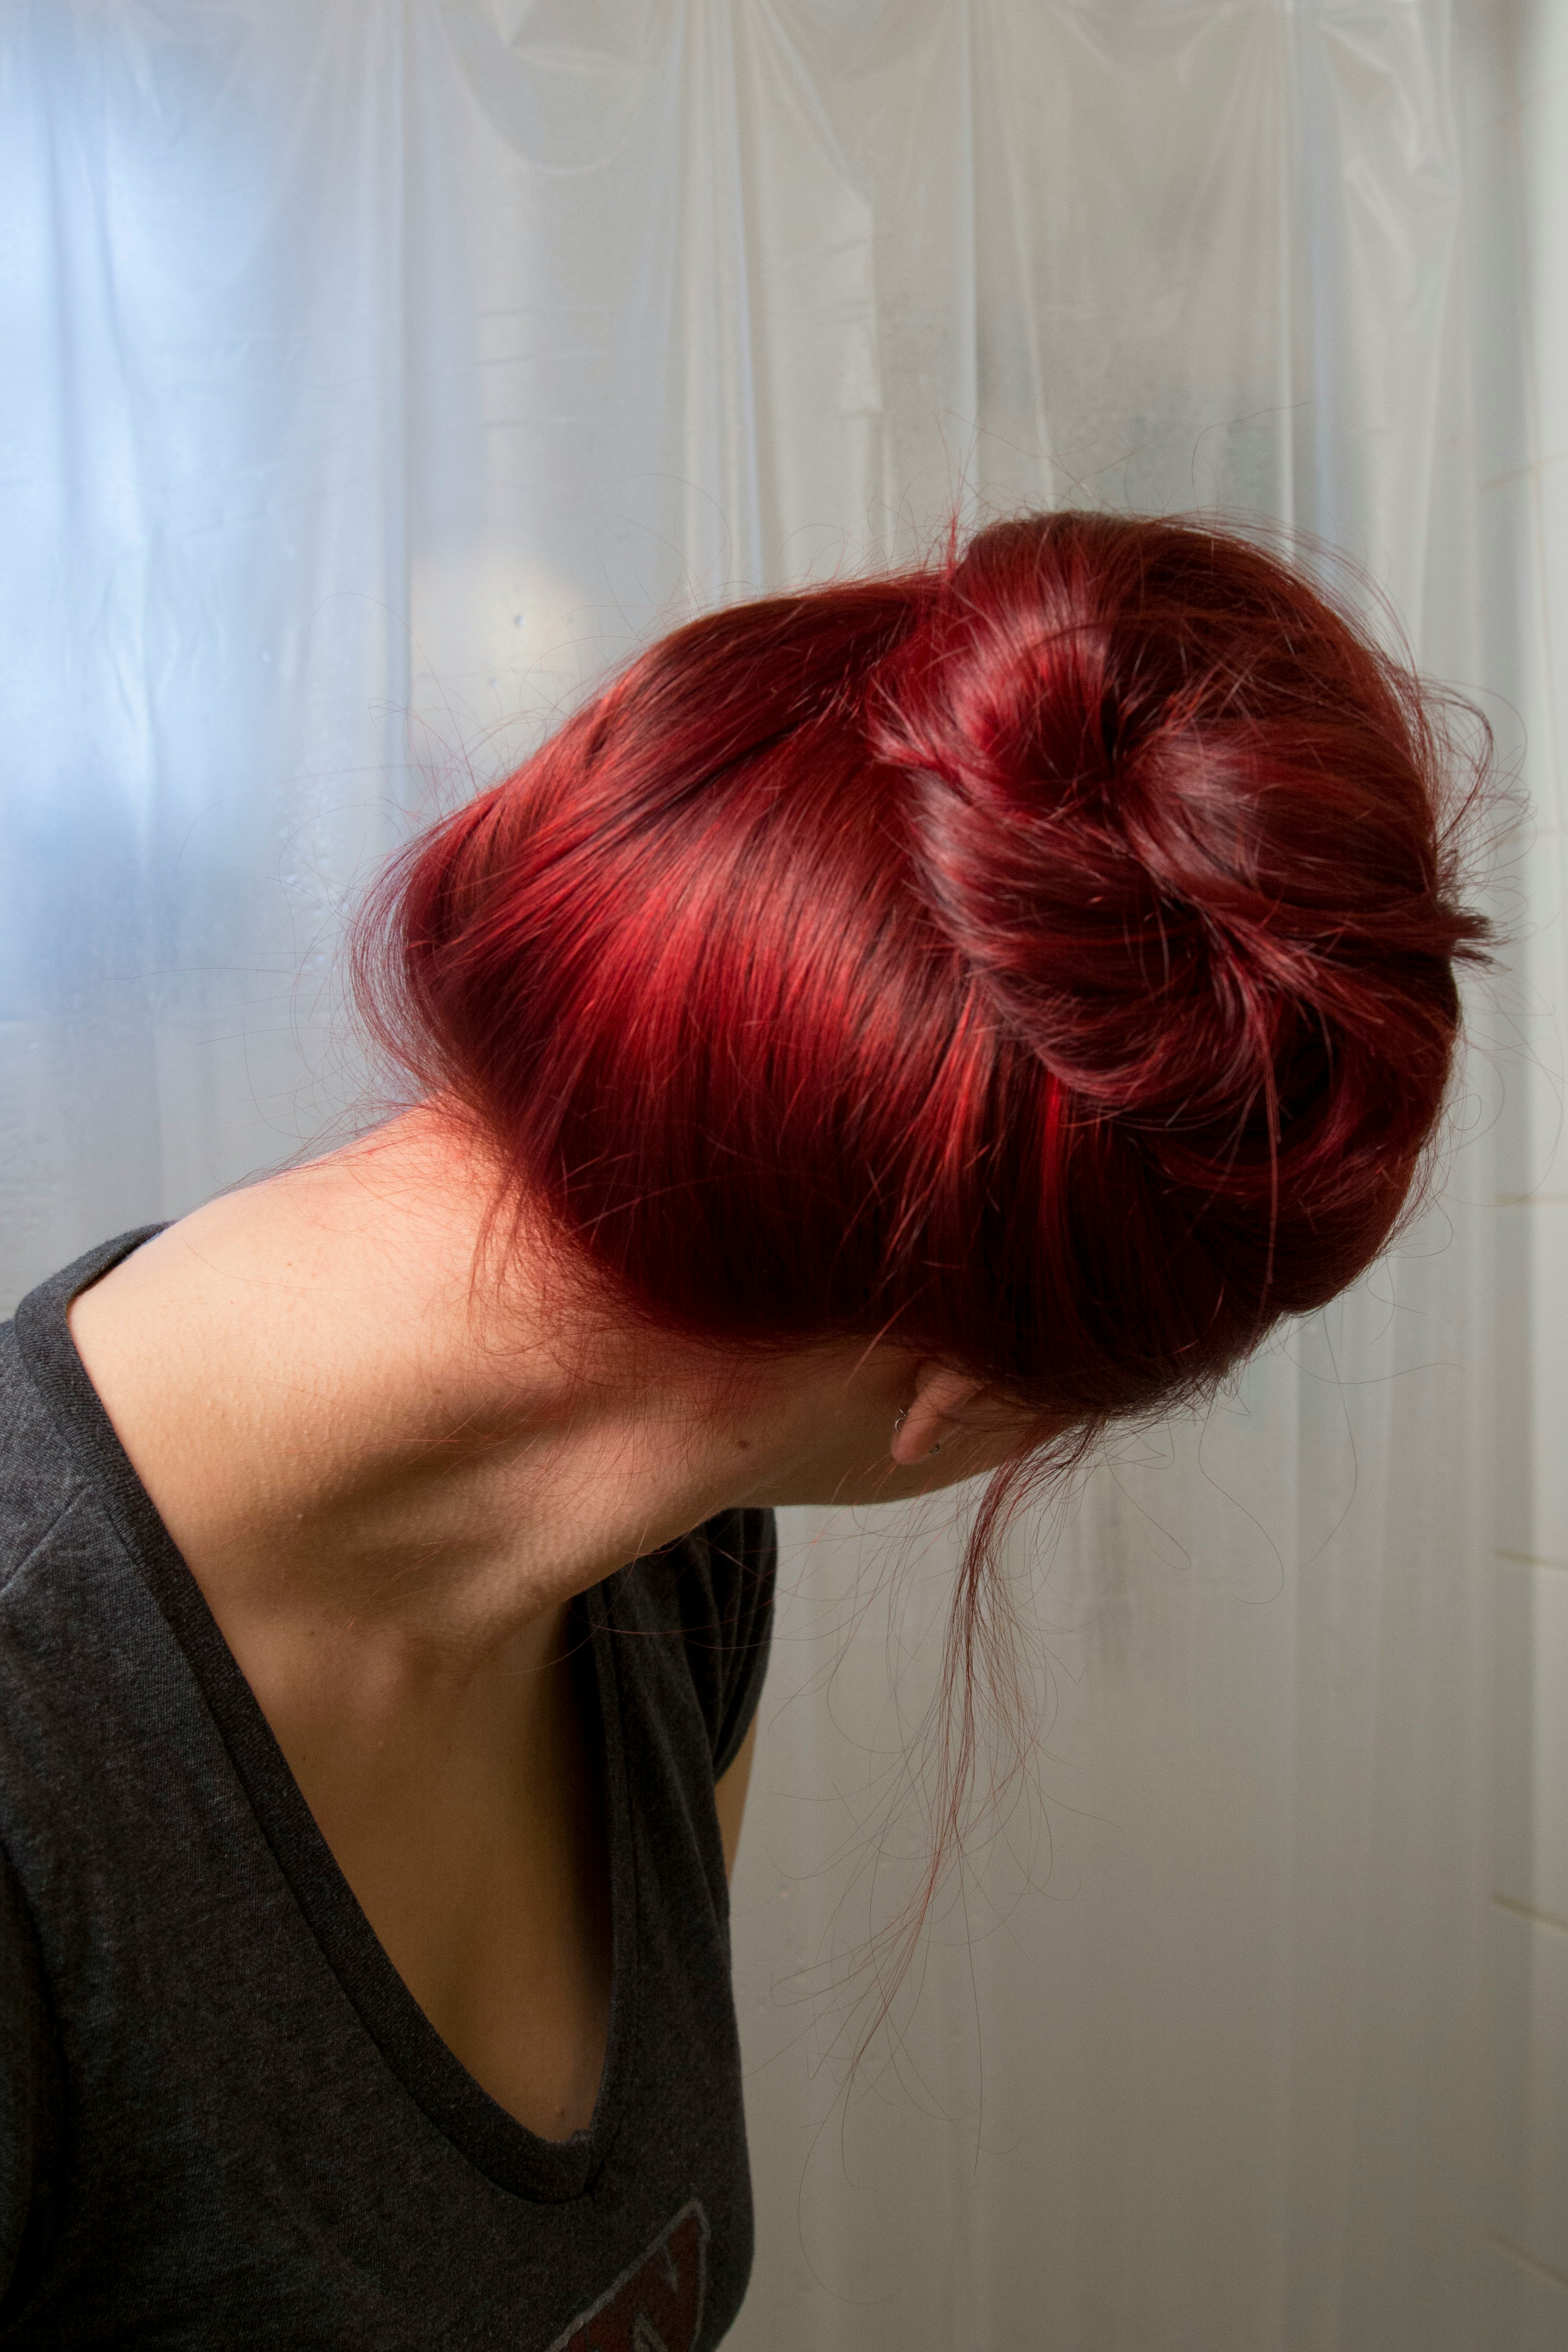 How To Dye Your Brown Hair Red Without Bleach If You Re In The